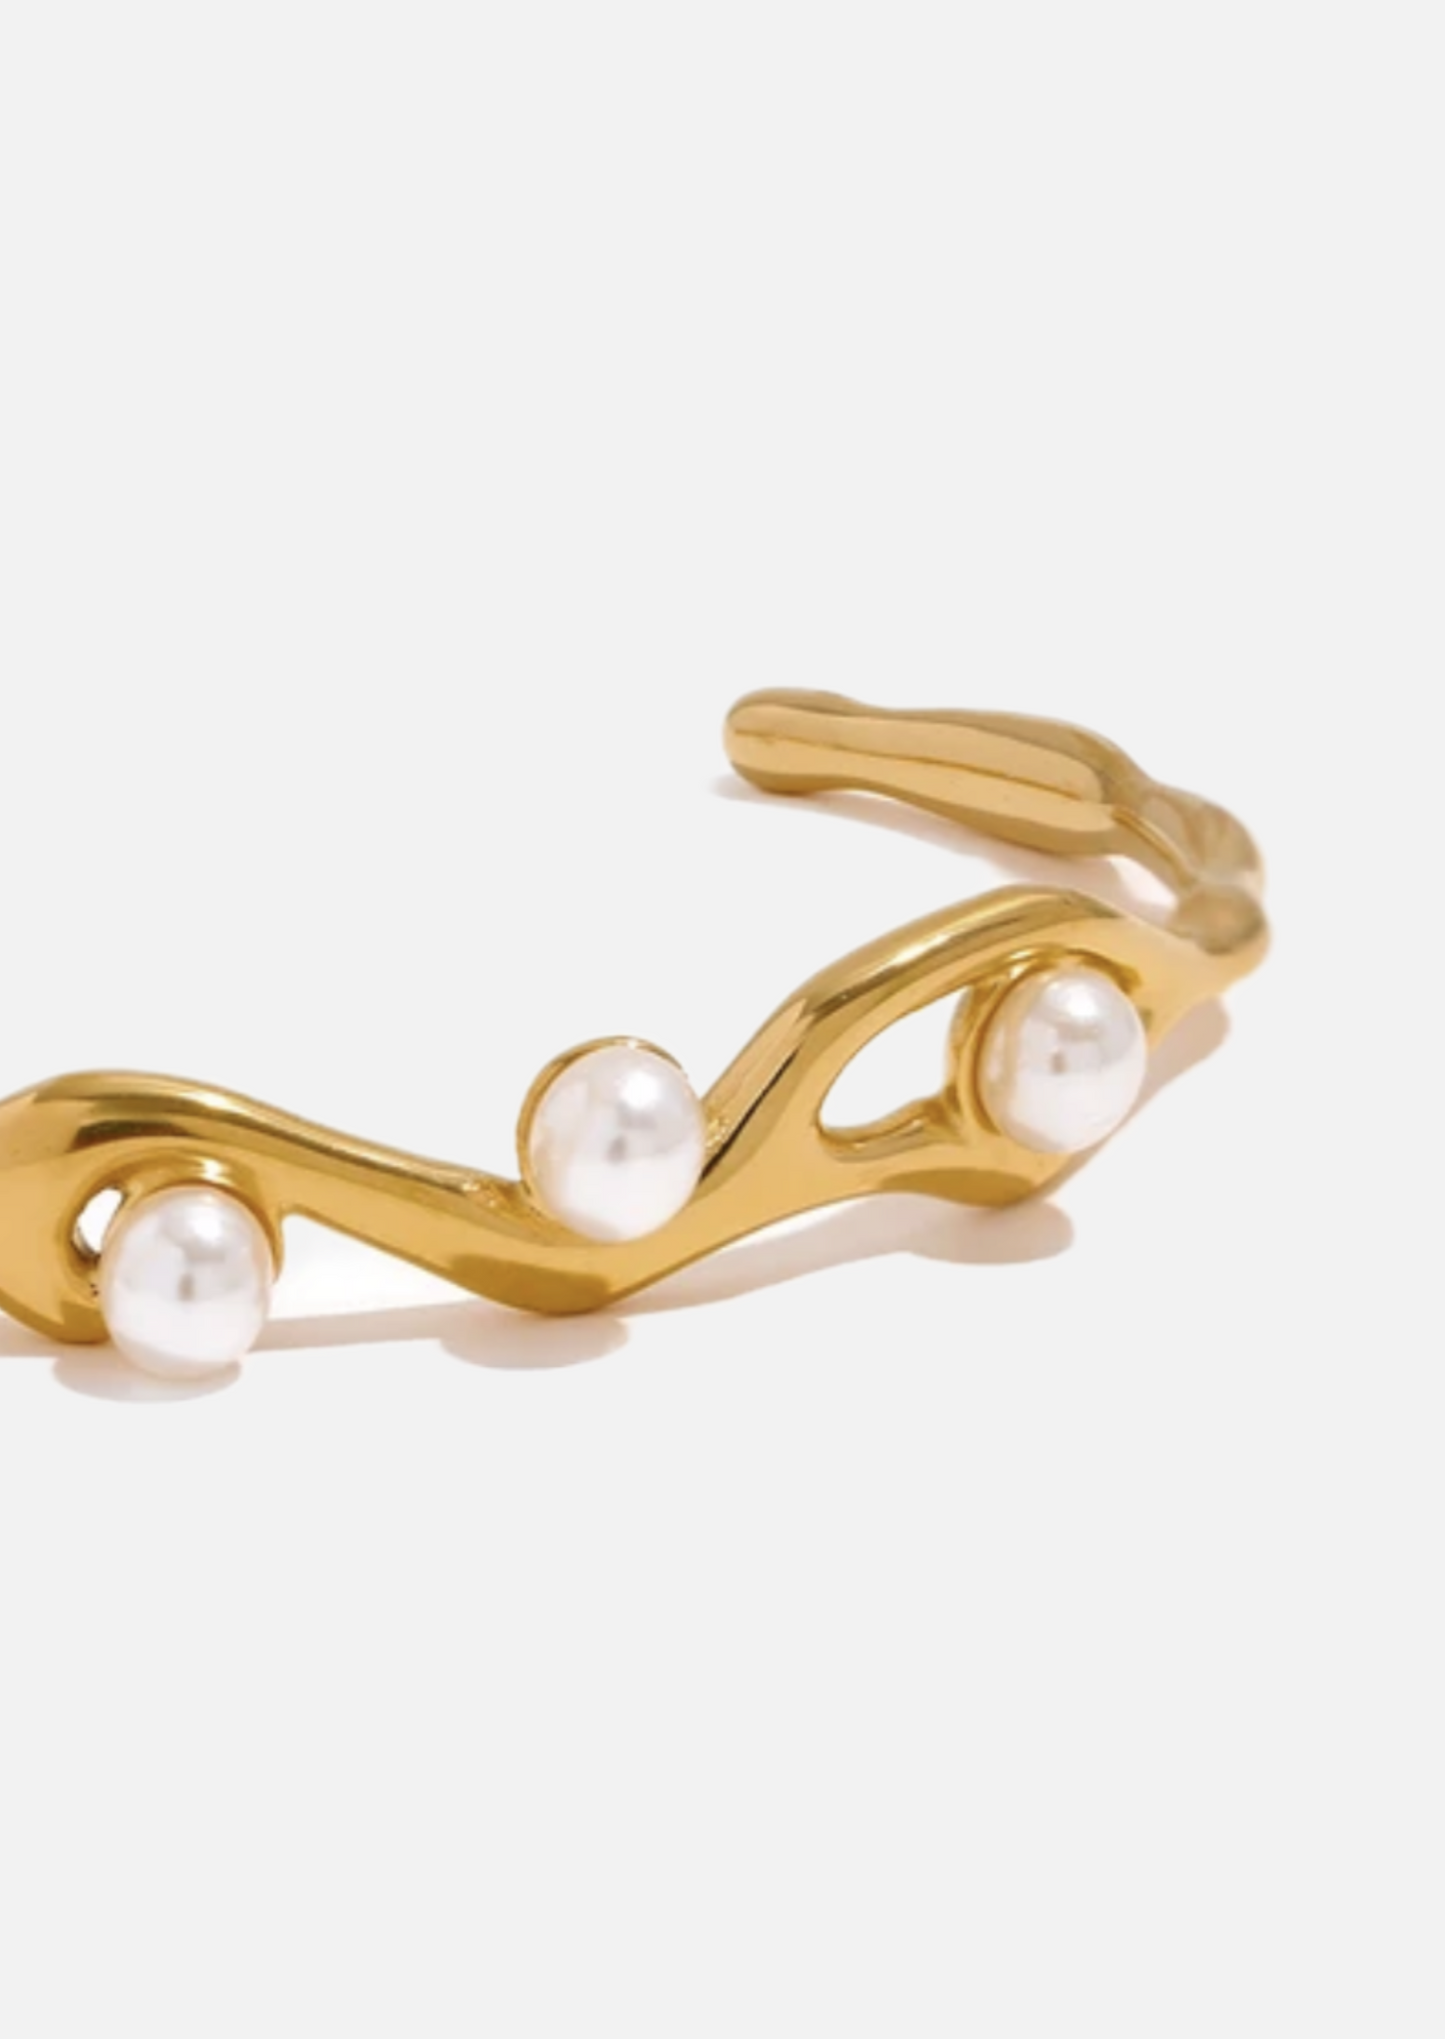 18K Gold Plated Twist Cuff Bracelet Bangle Simulated Pearls